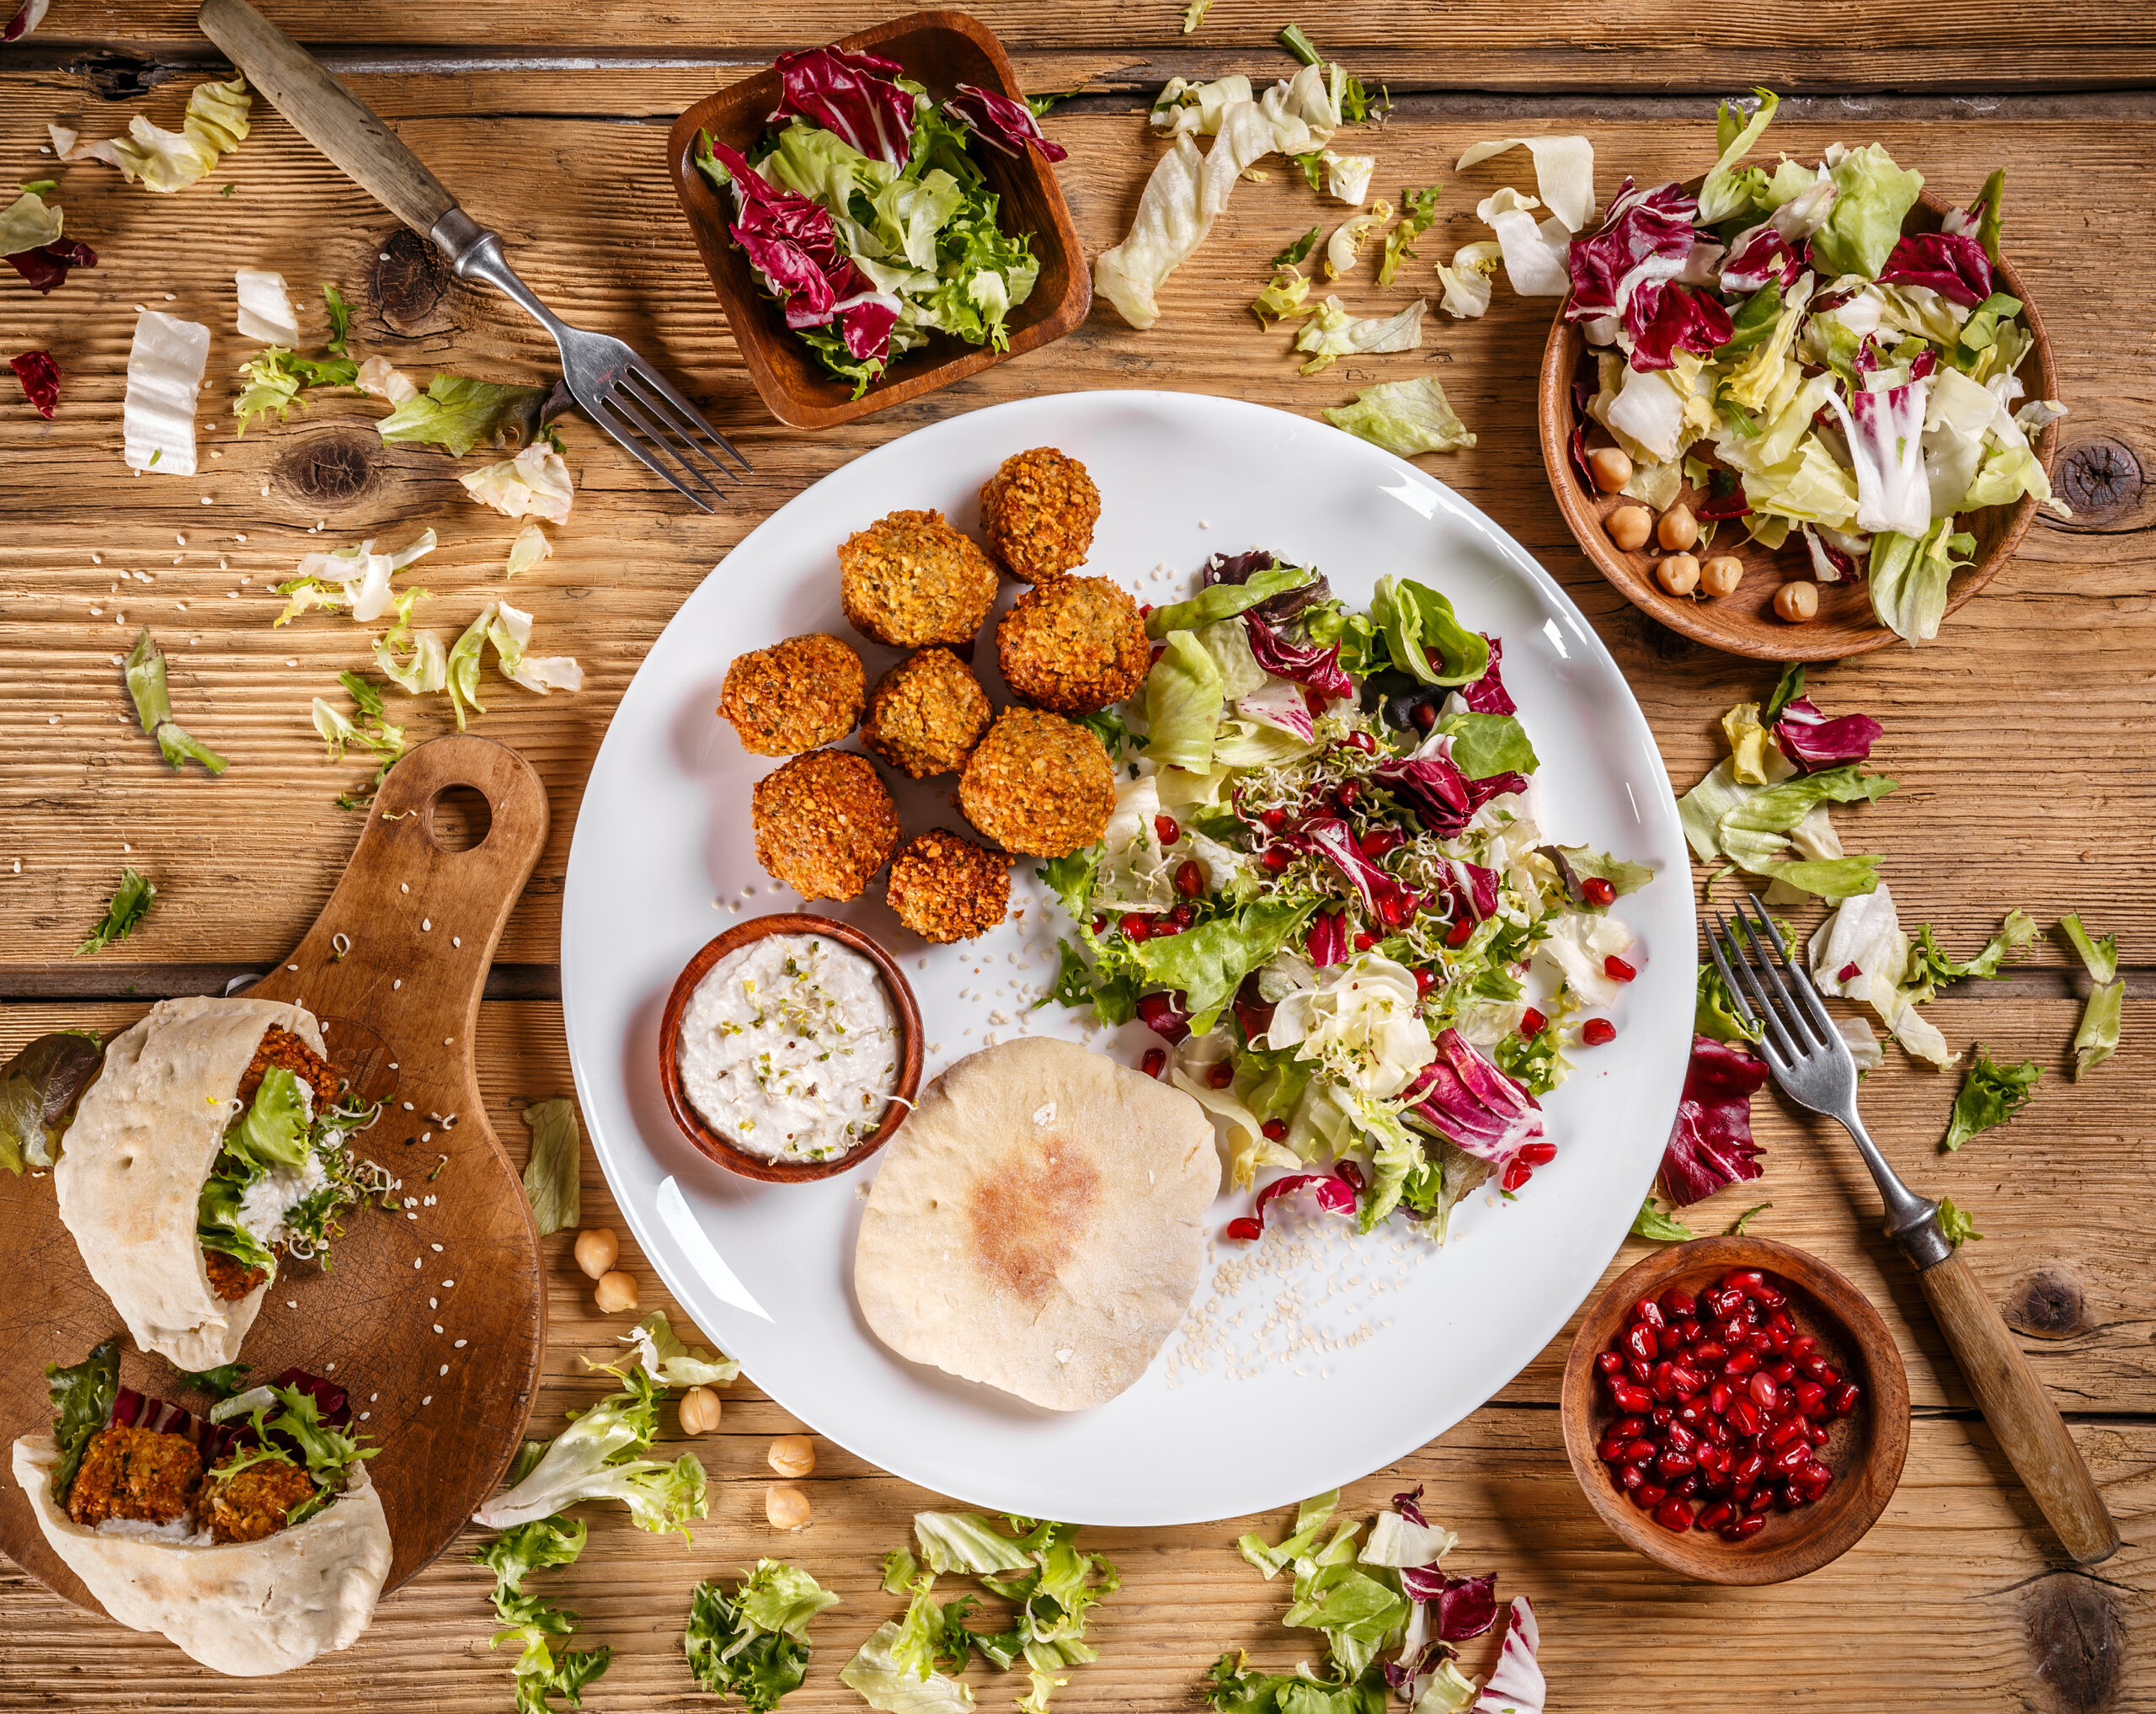 Plate of traditional falafel patties